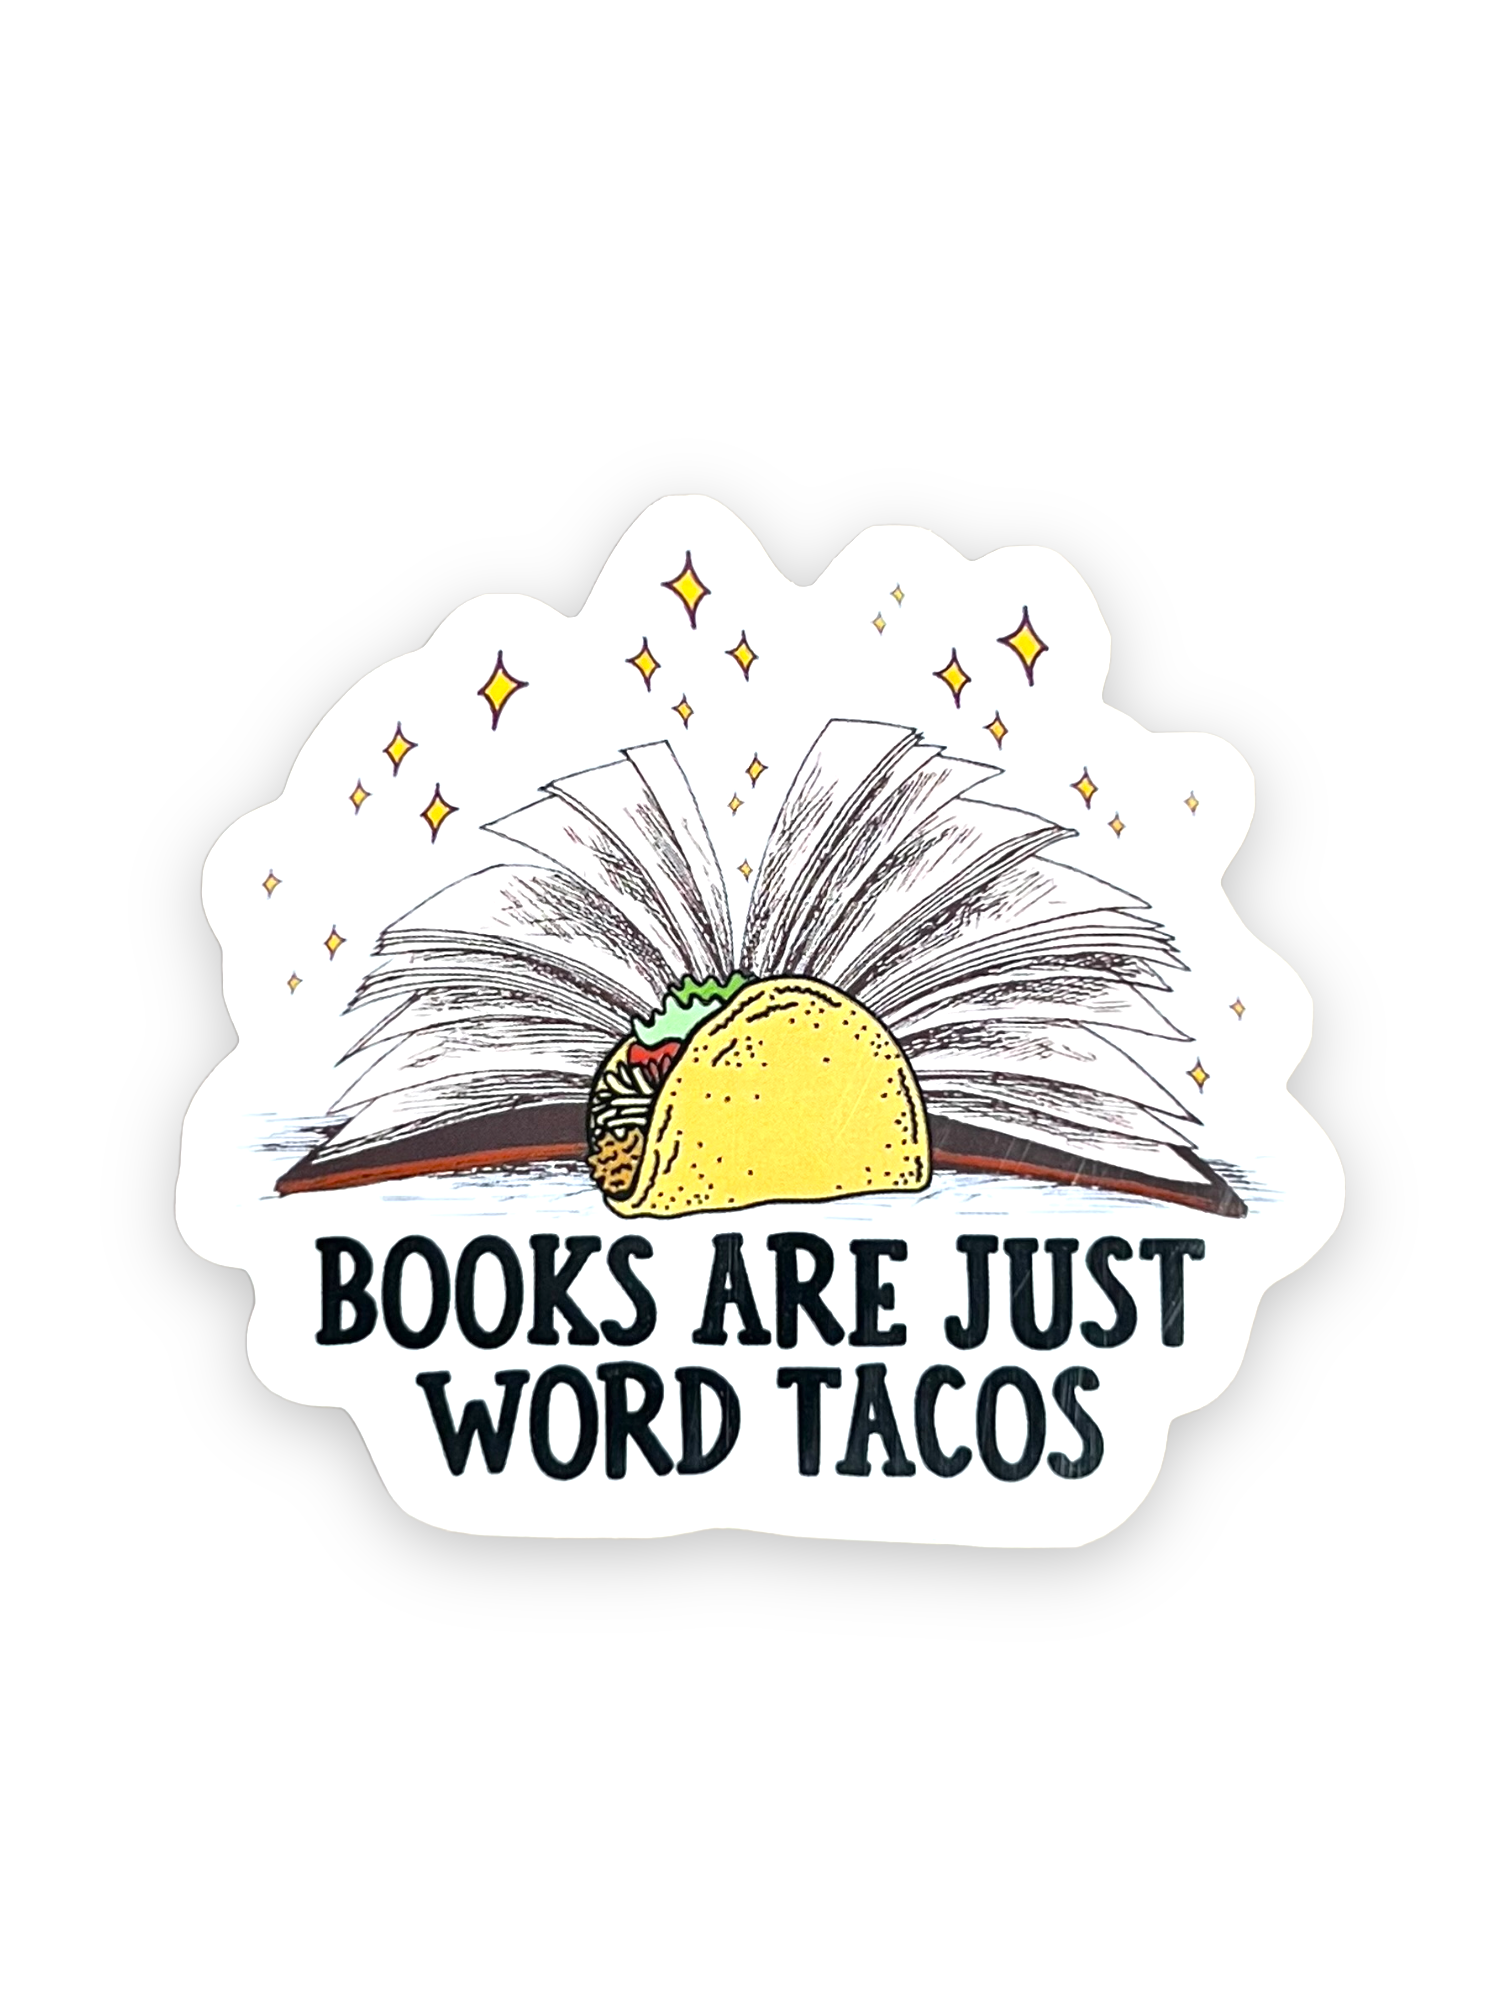 Books Are Just Word Tacos Sticker by Ace The Pitmatian Sold by Le Monkey House